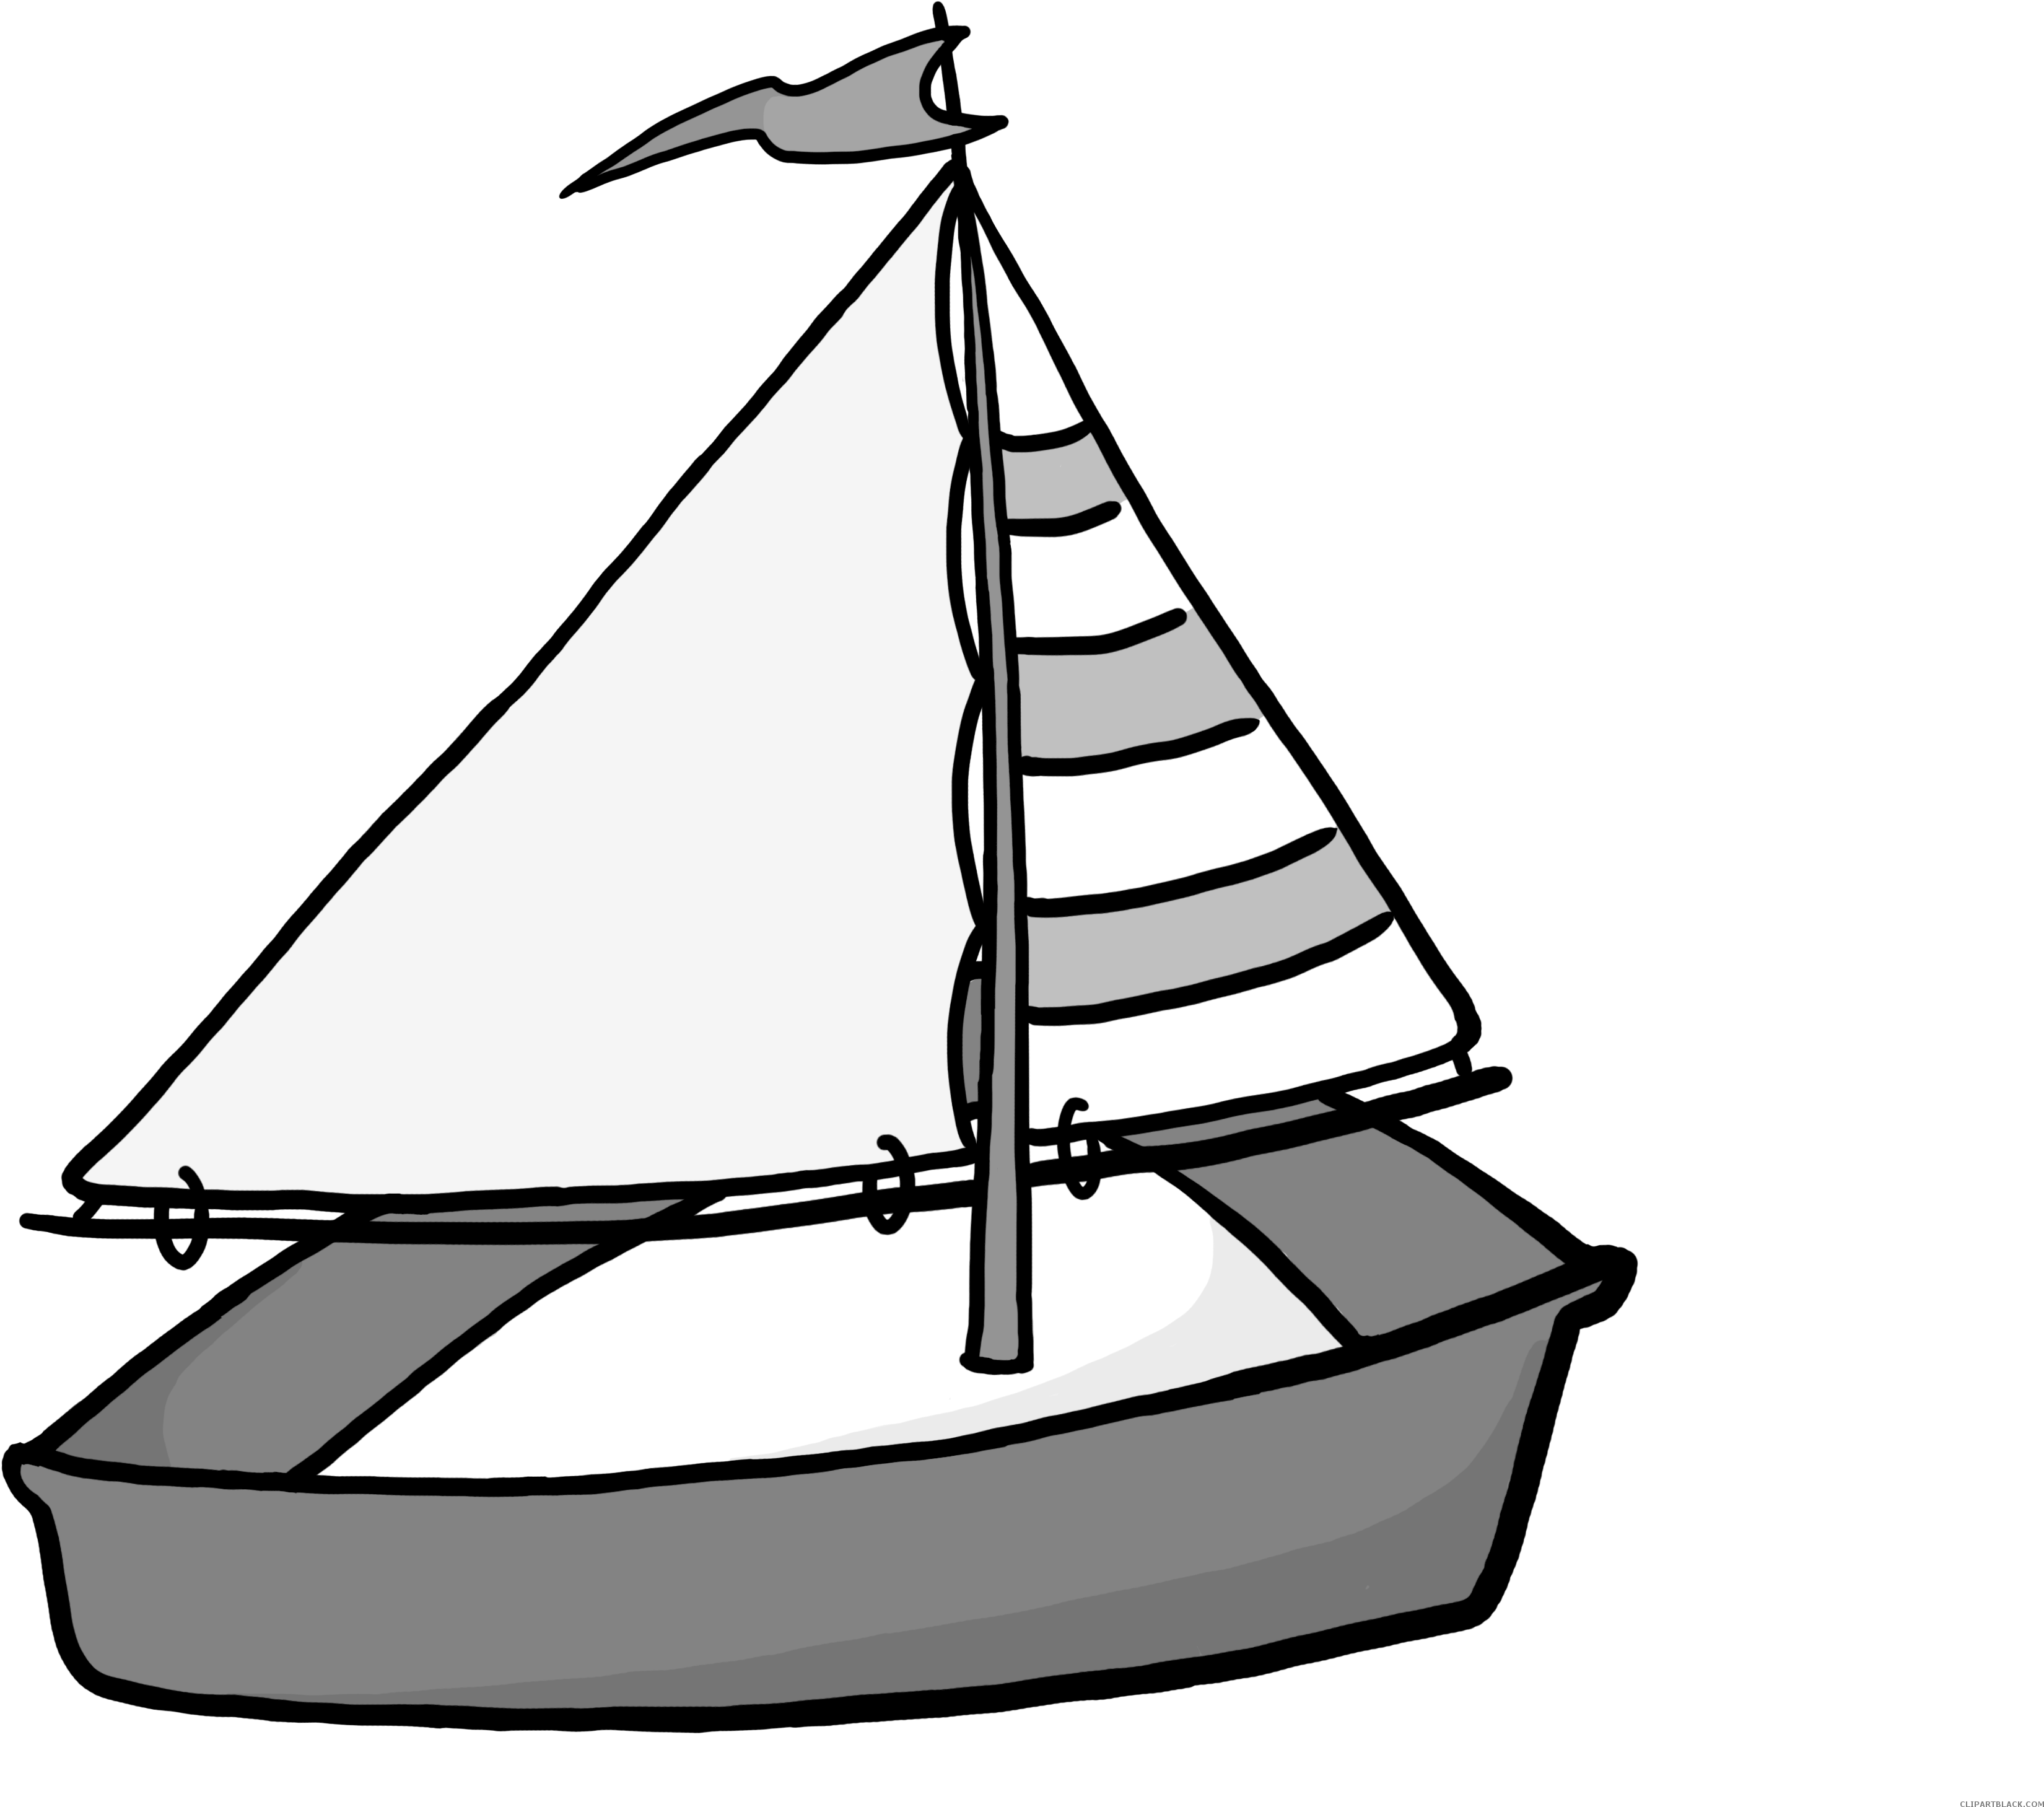 Download and share clipart about Cartoon Sailboat Transportation Free Black ...